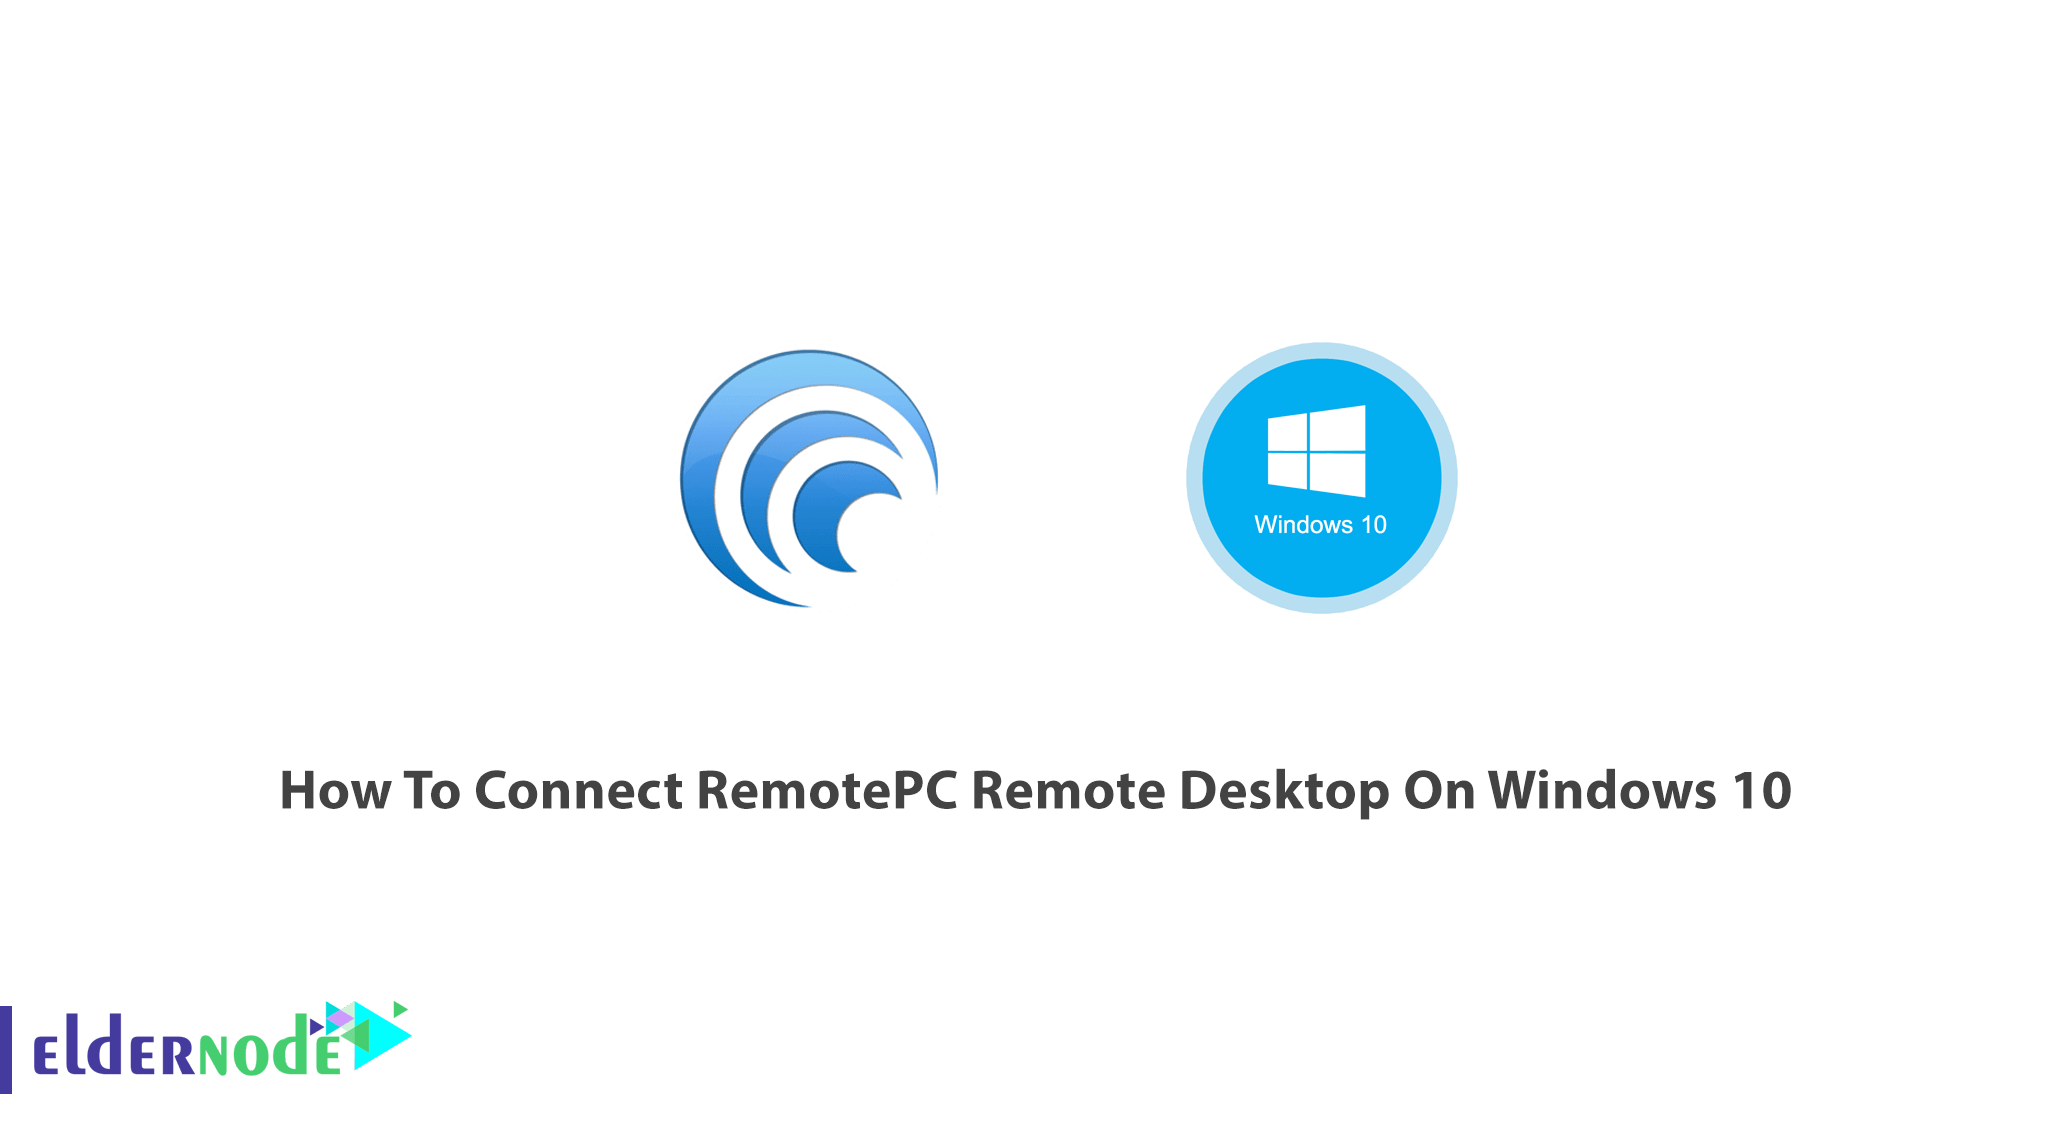 How To Connect RemotePC Remote Desktop On Windows 10